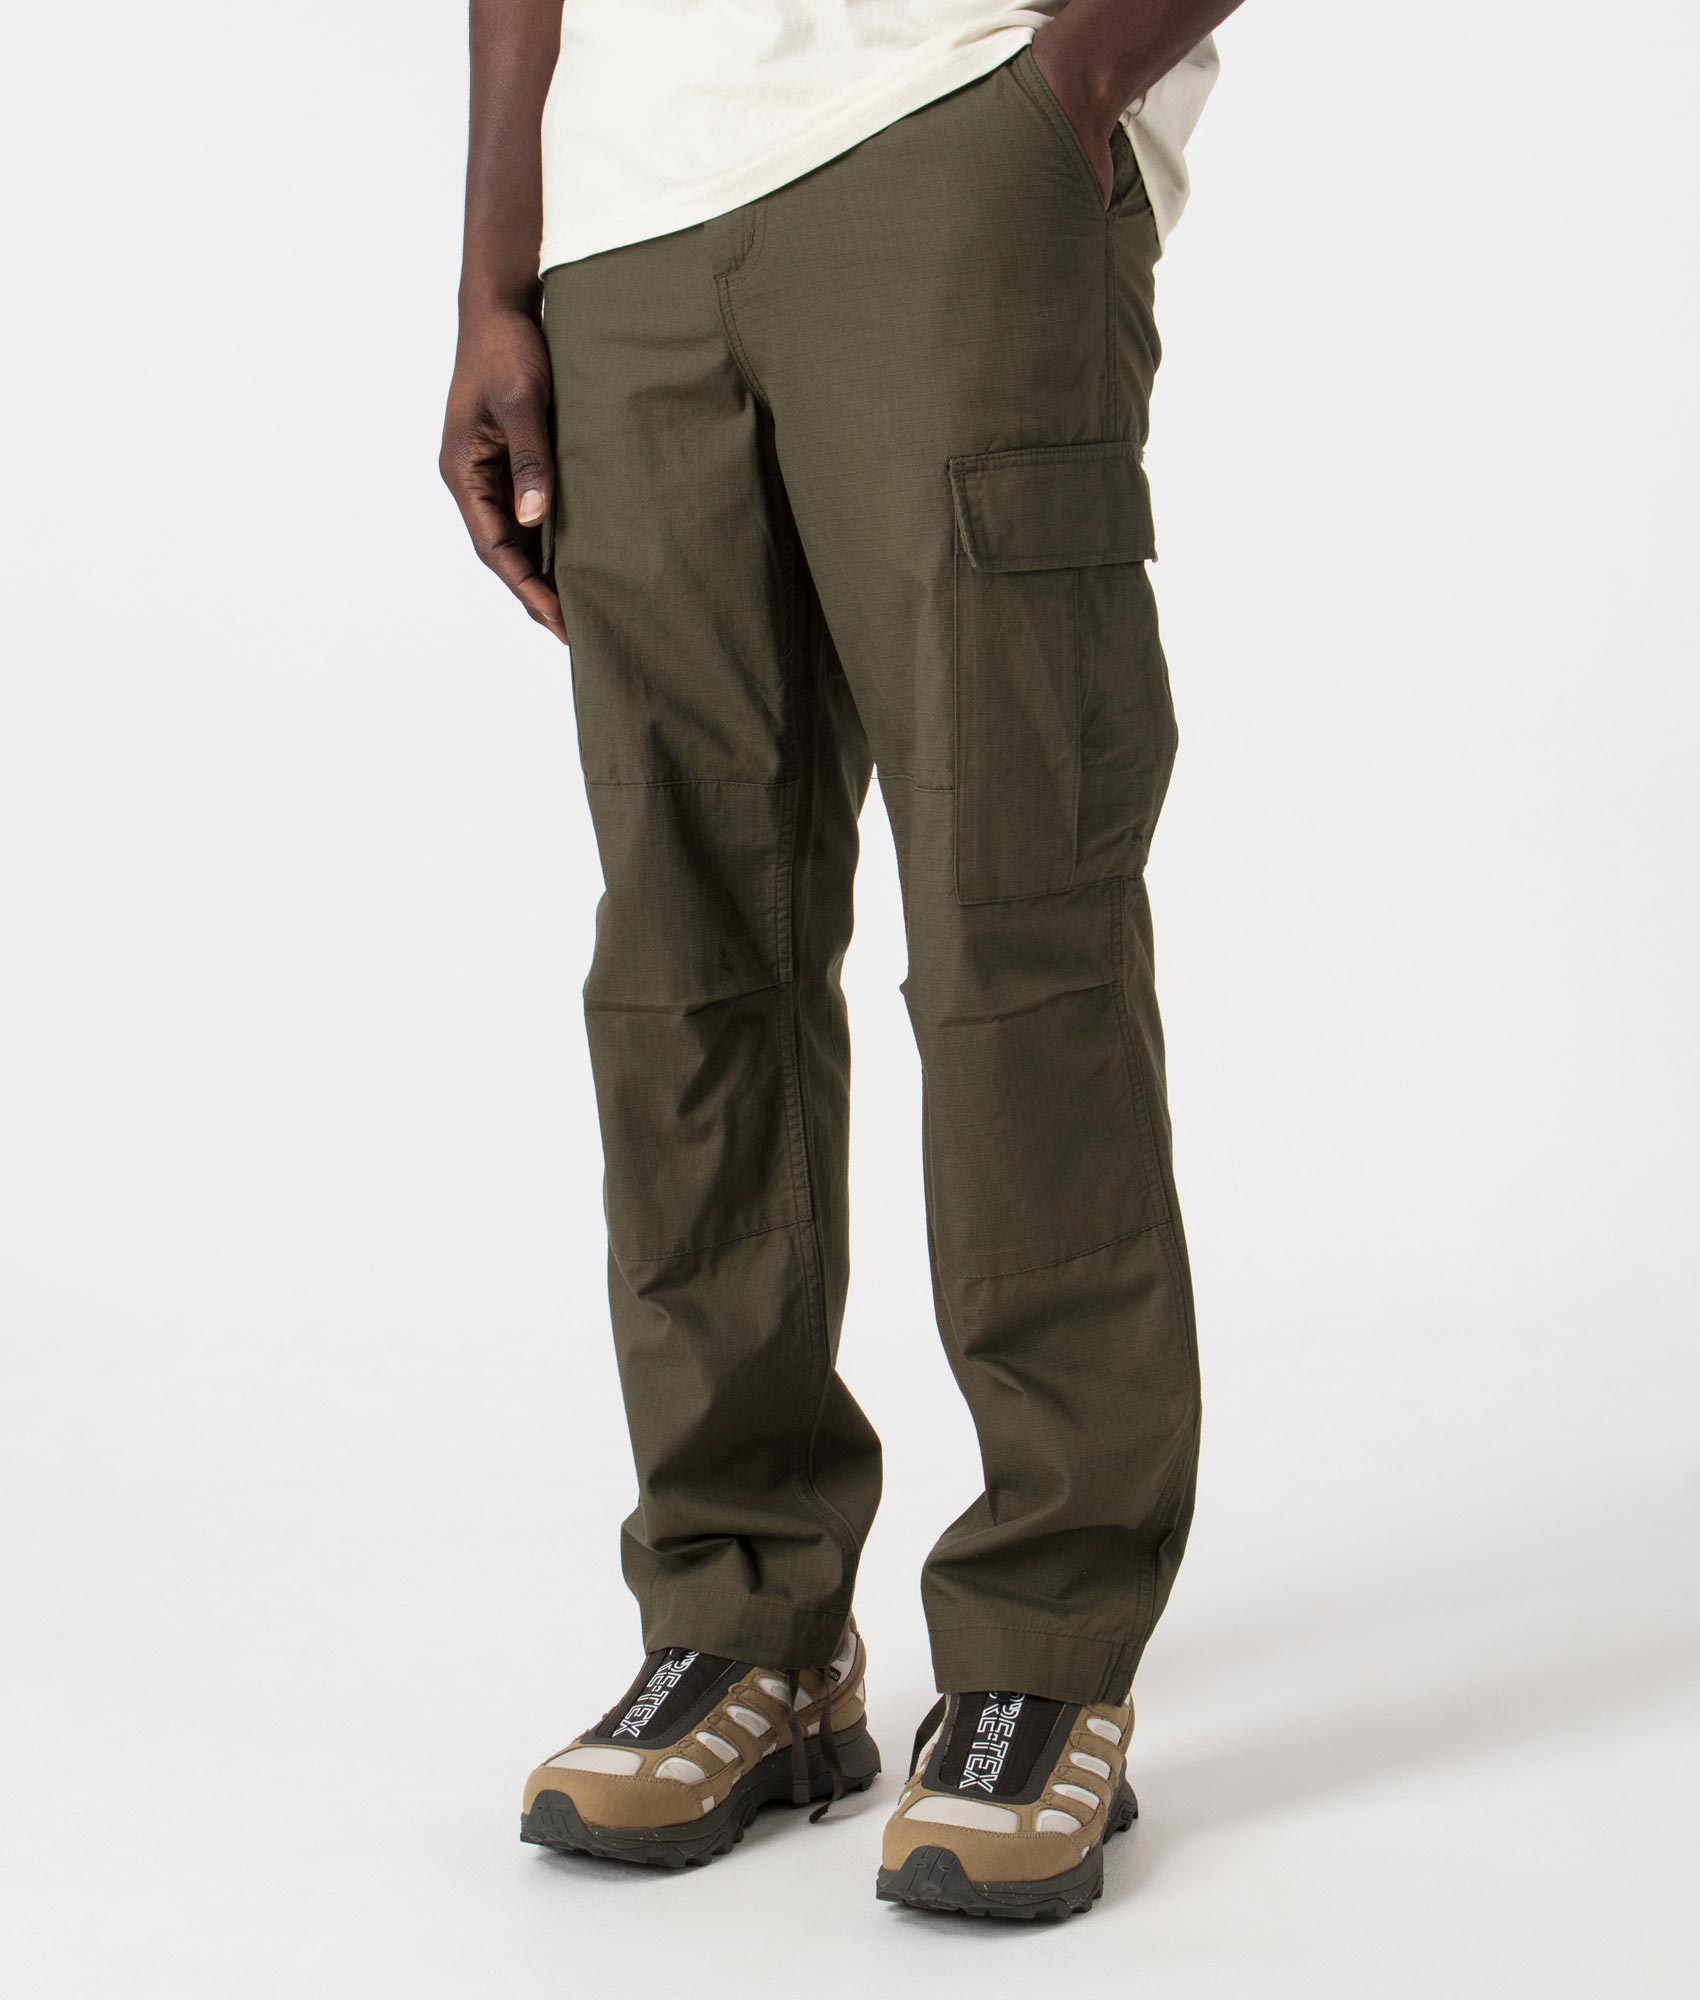 Carhartt WIP Mens Regular Fit Cargo Pants - Colour: 6302 Cypress Rinsed - Size: 34S